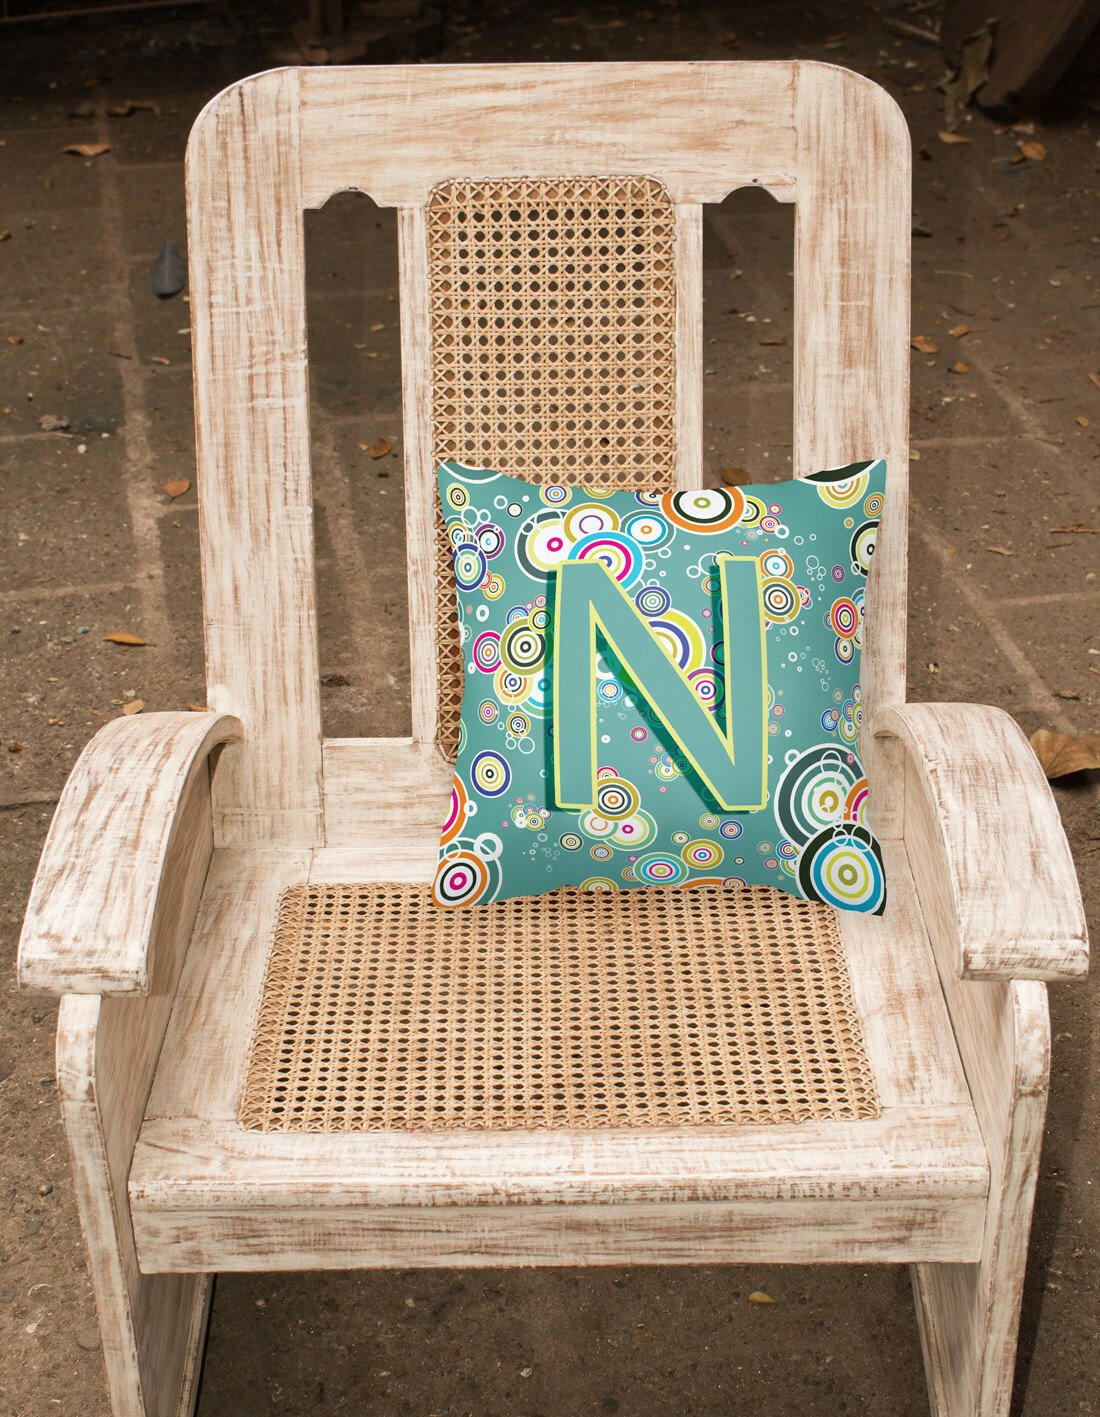 Letter N Circle Circle Teal Initial Alphabet Canvas Fabric Decorative Pillow CJ2015-NPW1414 by Caroline's Treasures